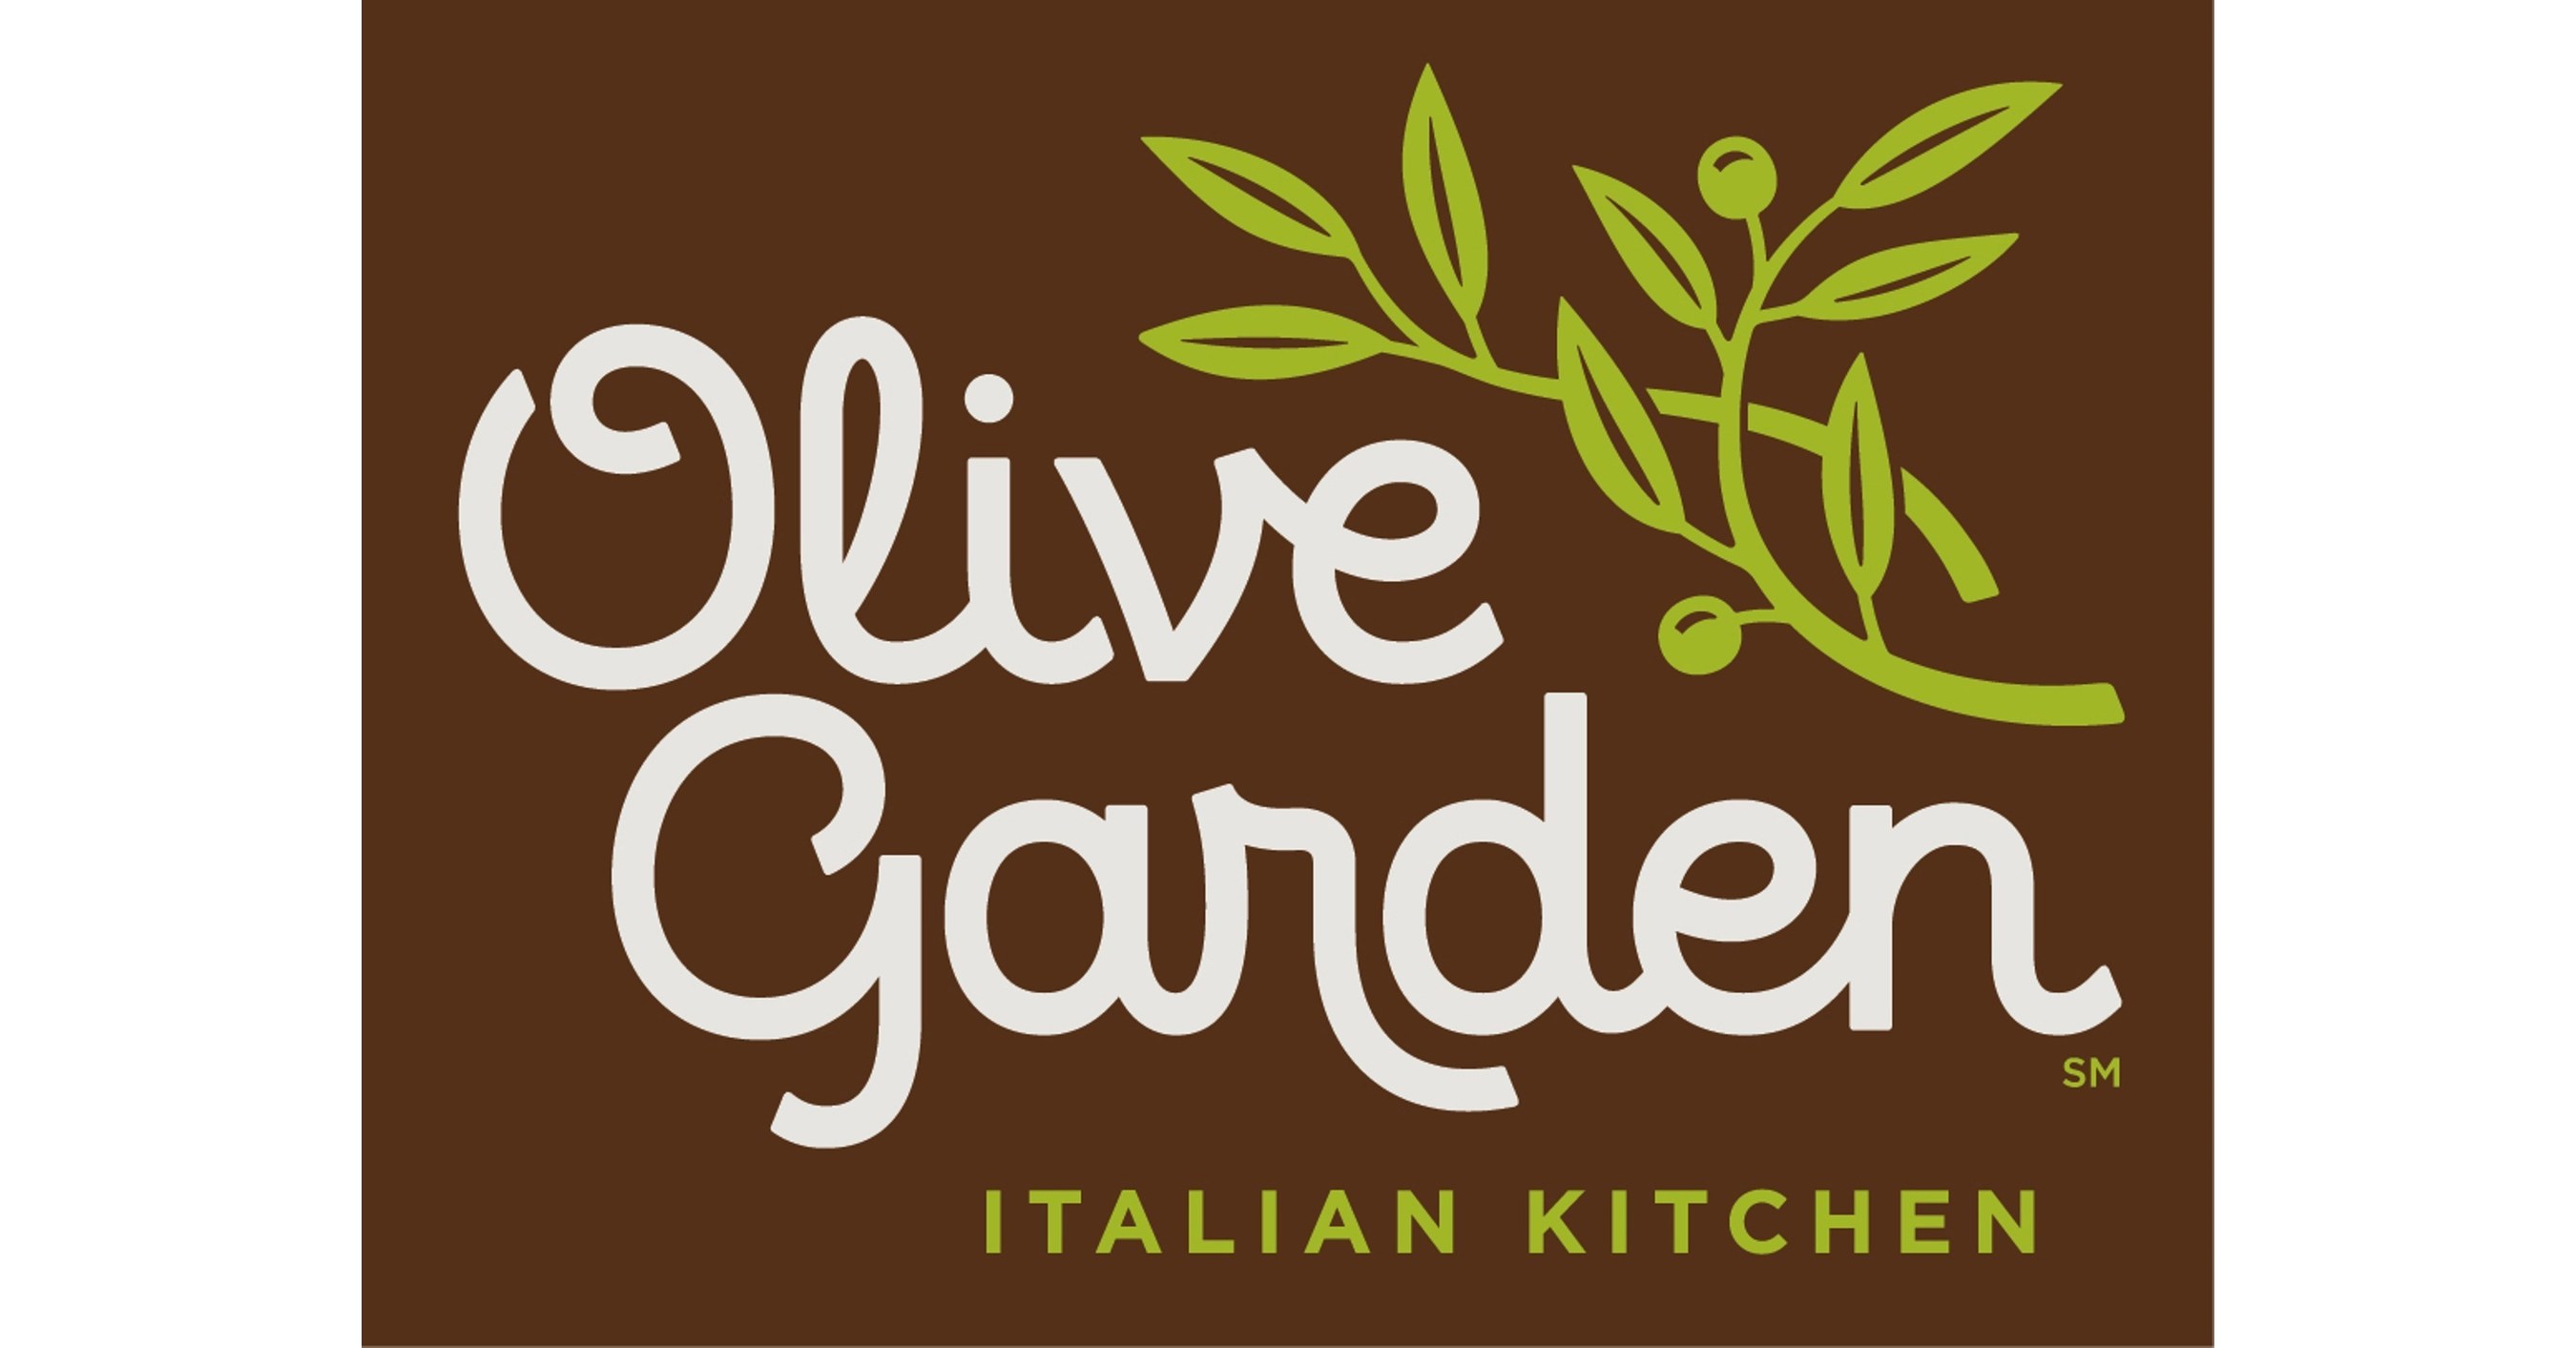 Olive Garden Introduces 200 'Pasta Passport to Italy' to Celebrate